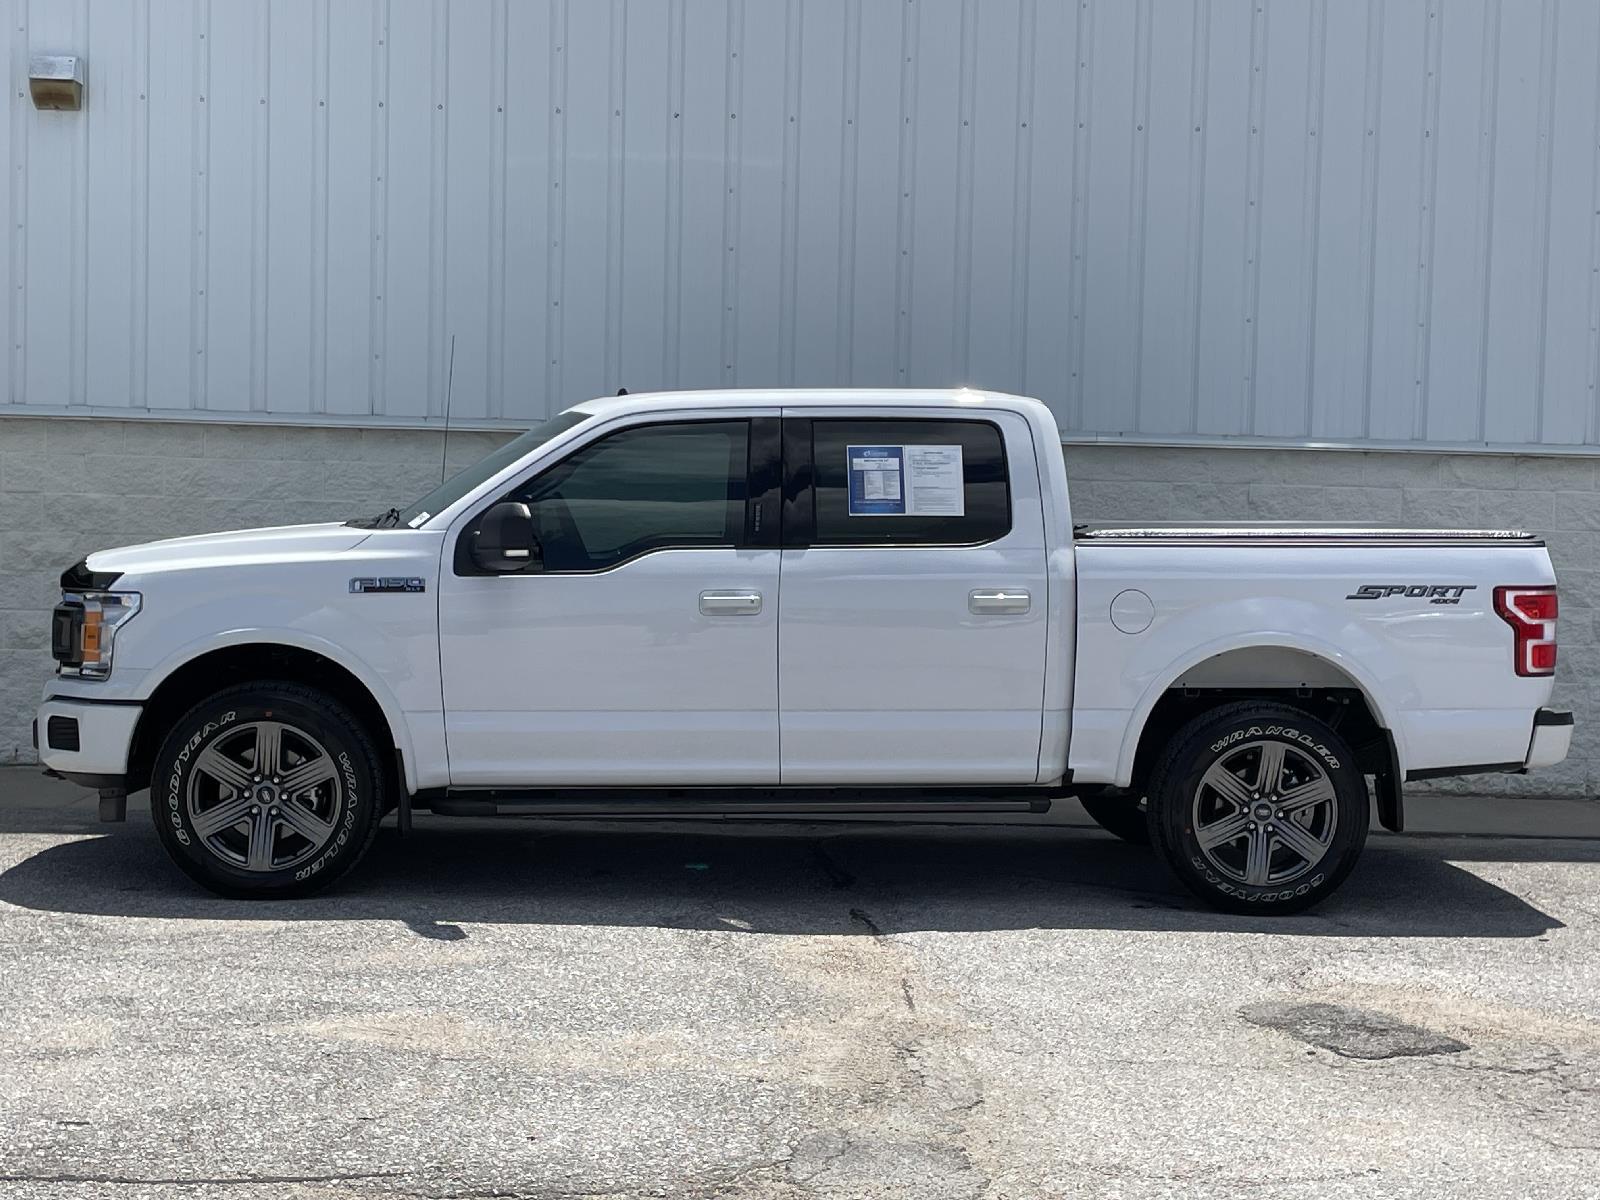 Used 2020 Ford F-150 XLT Crew Cab Truck for sale in Lincoln NE